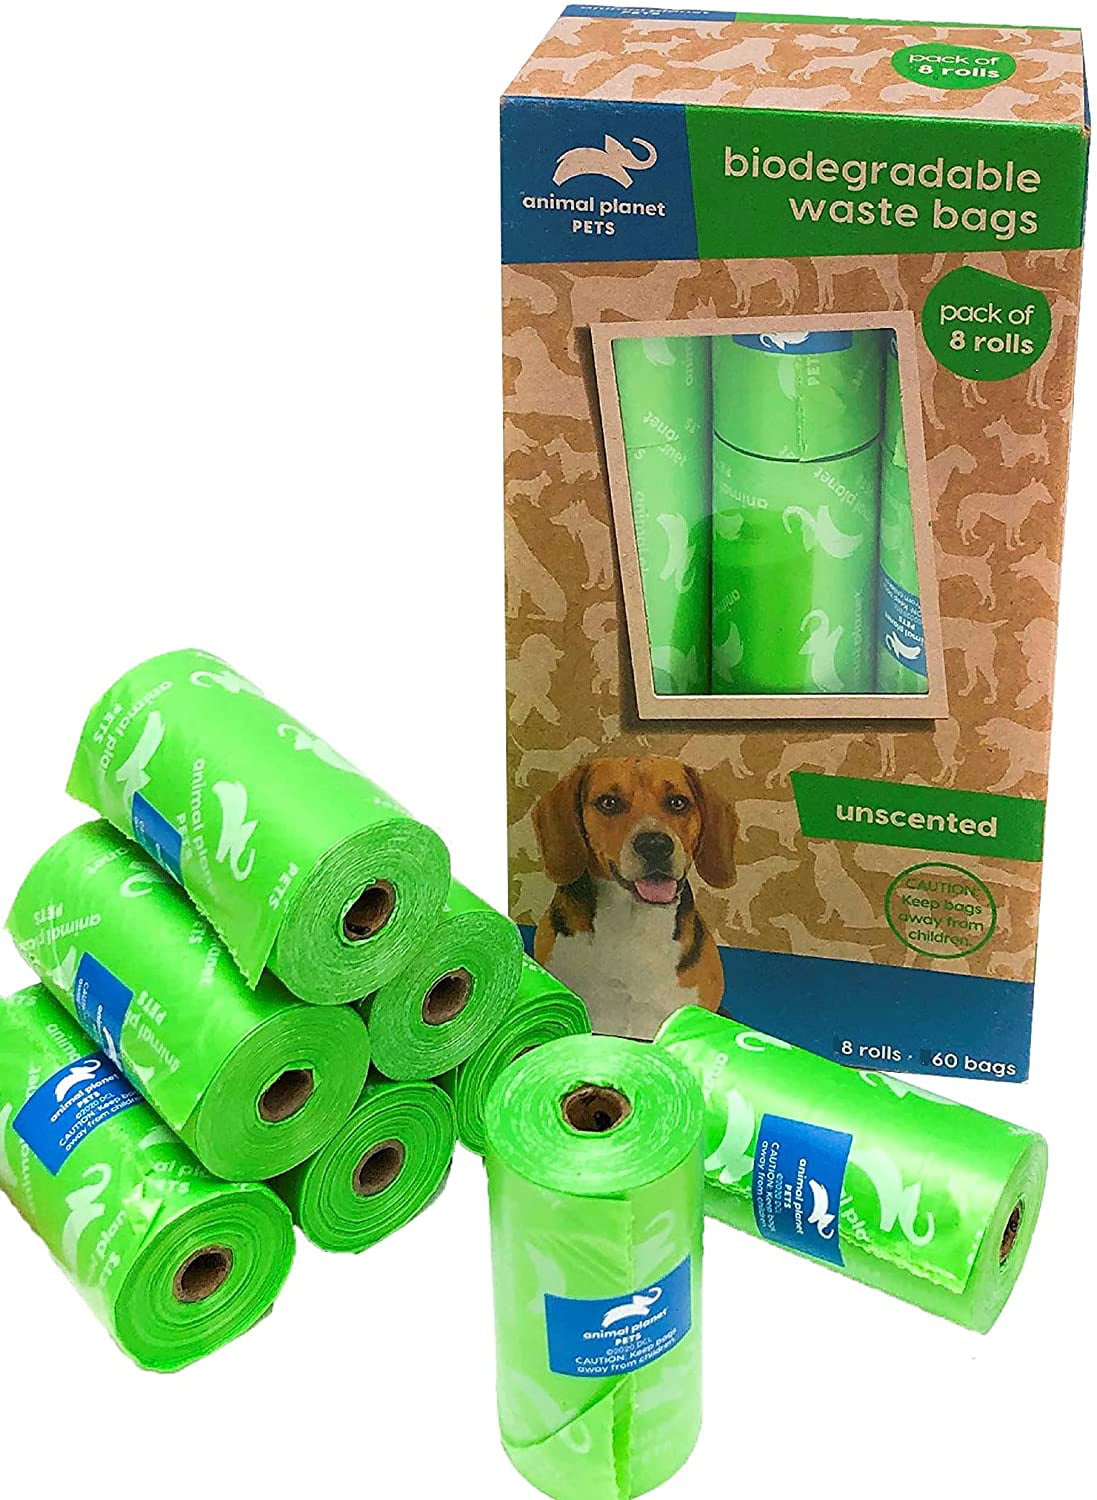 Extra-Large Grocery Bag Size XL Sized Pet Waste Bags with Handles Compostable Dog Poop Bag Pooper Scooper & Swivel Bin Waste Bags Refill Cat Litter Box Clean-up Biodegradable Poop Bags for dogs 